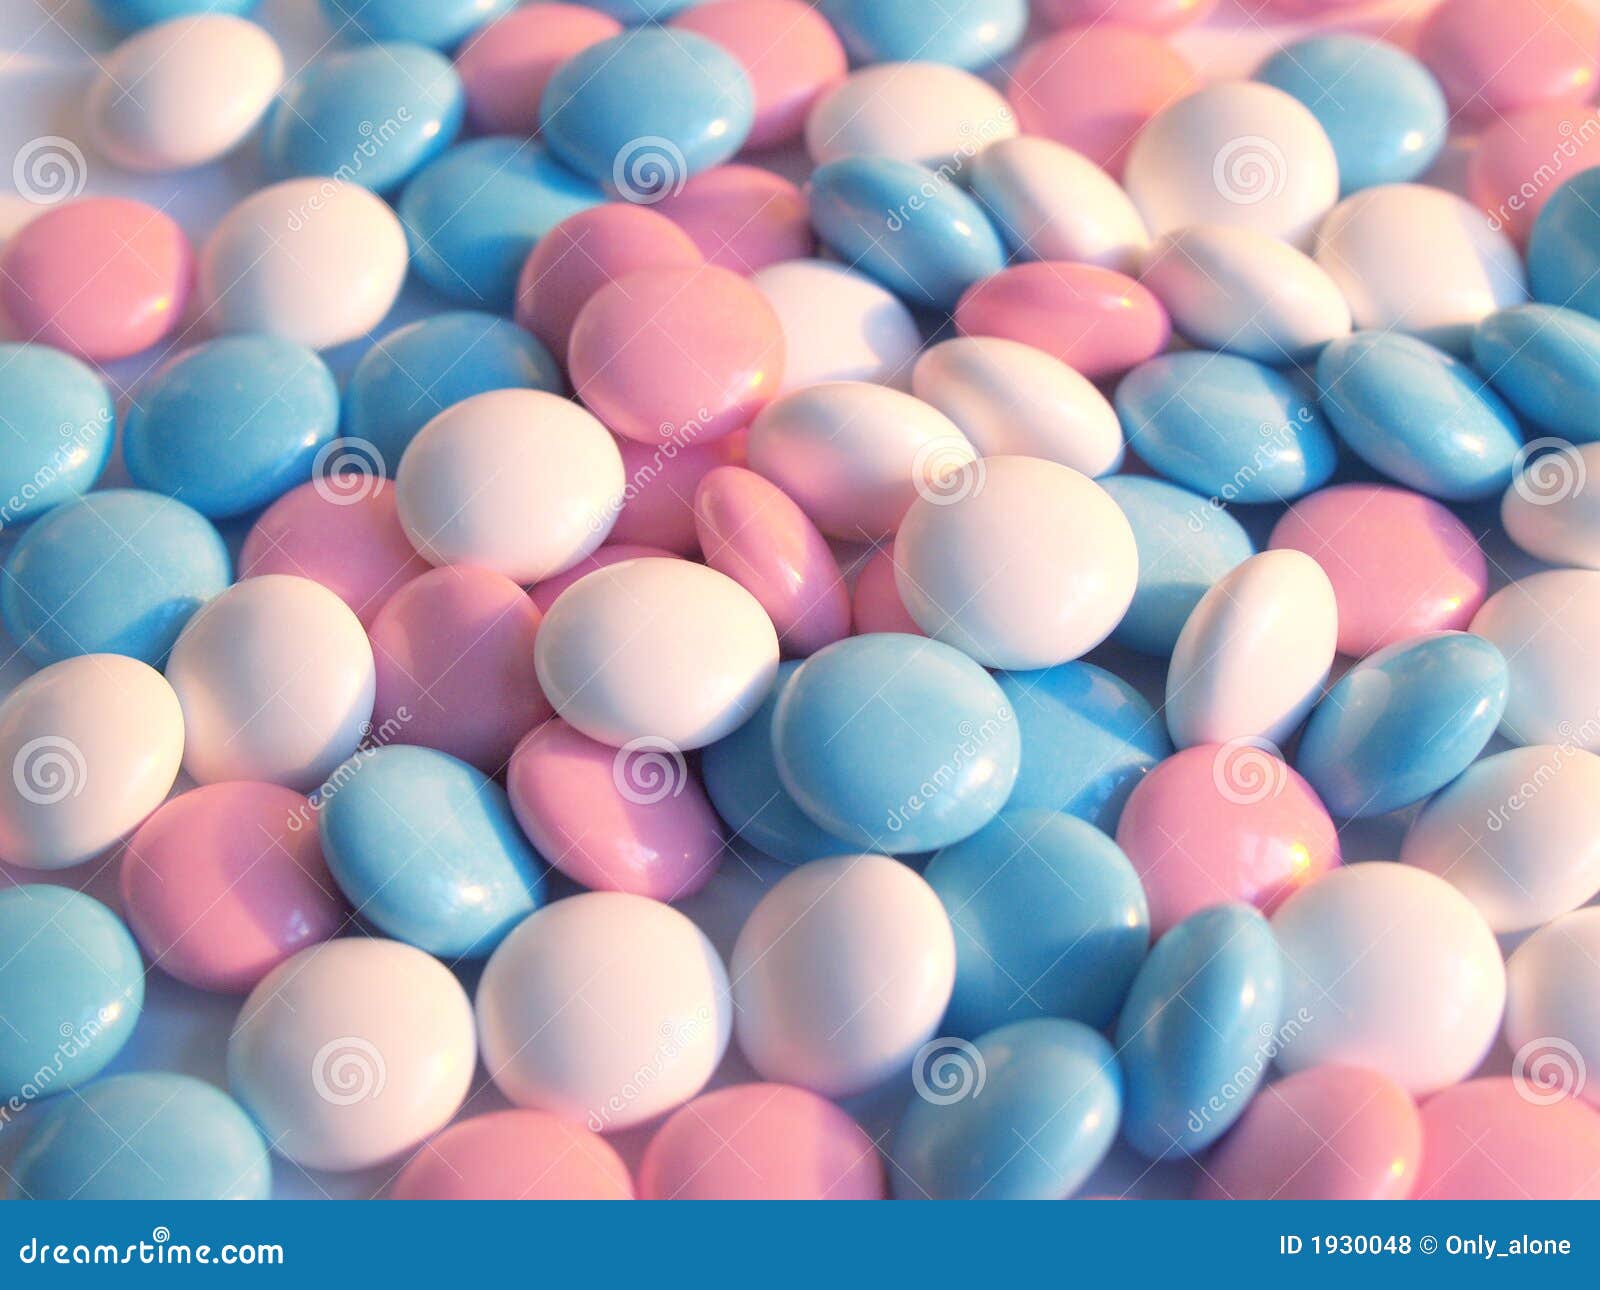 Blue, white and pink pills stock photo 